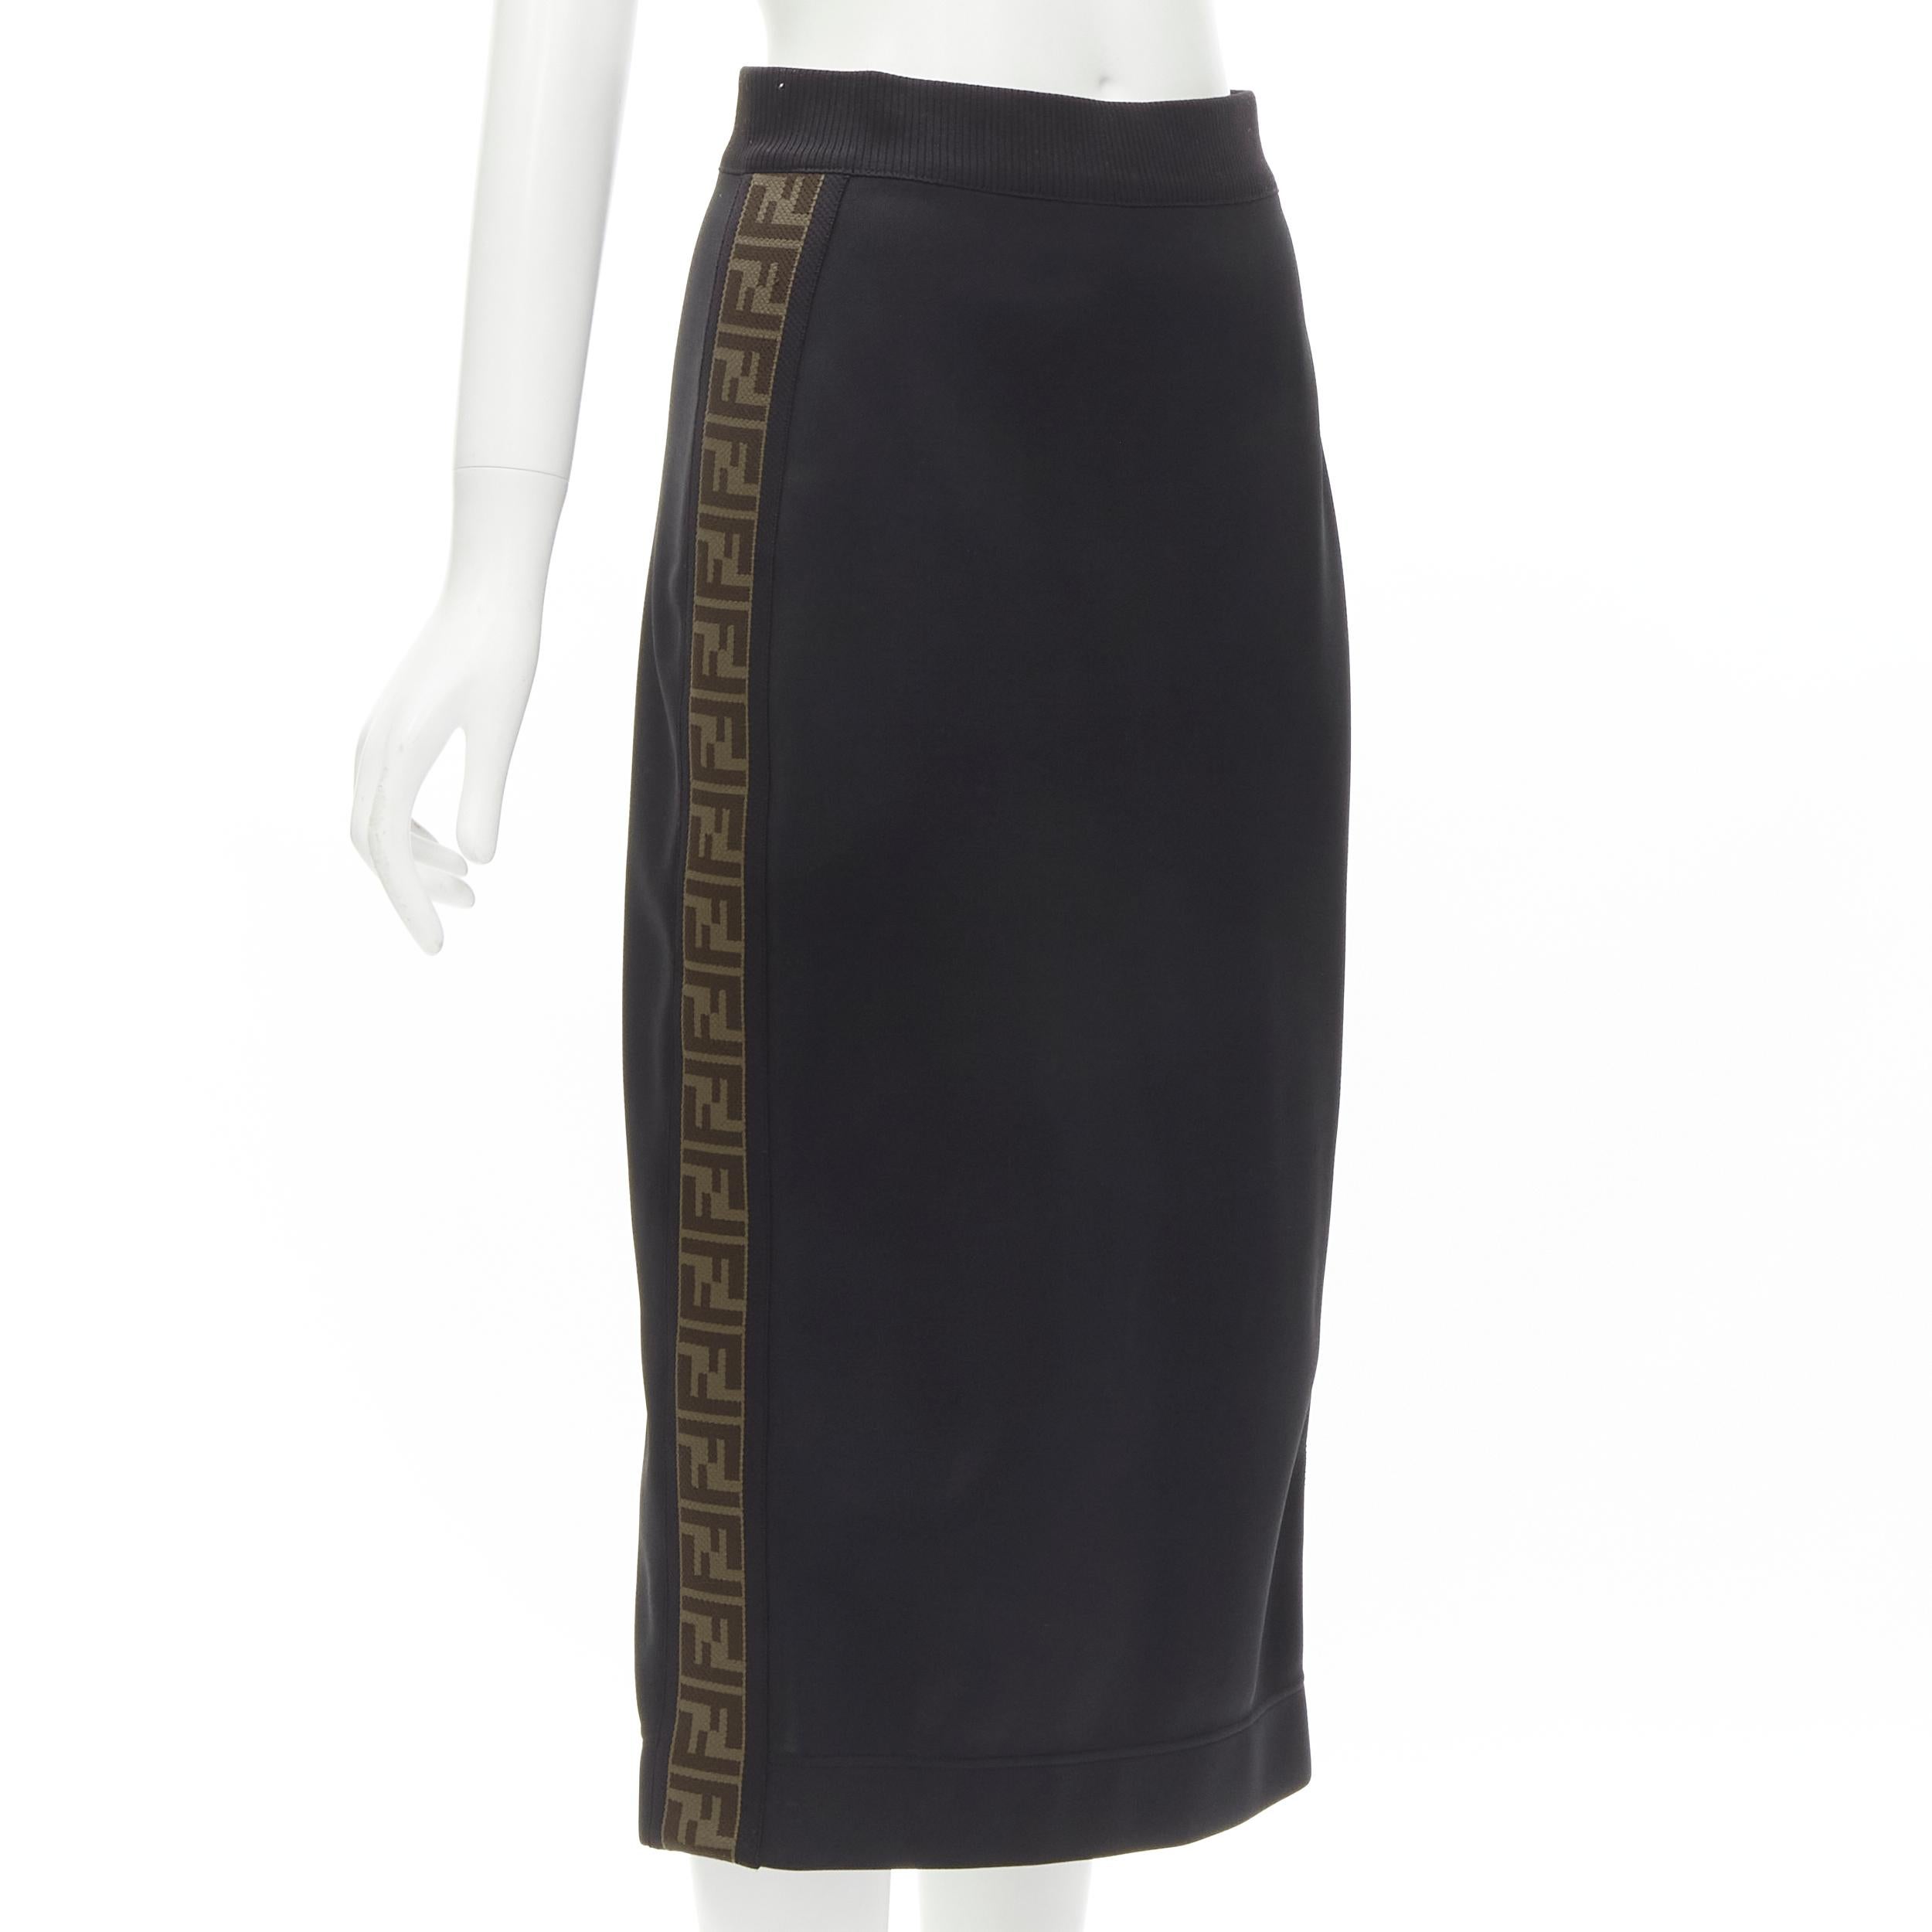 FENDI black brown FF Zucca monogram trim knee length skirt IT42 M
Brand: Fendi
Material: Polyester
Color: Black
Pattern: Solid
Closure: Zip
Extra Detail: FF Zucca band trim along side. Zip back closure. Center nack vent. Ribbed waist band.
Made in: